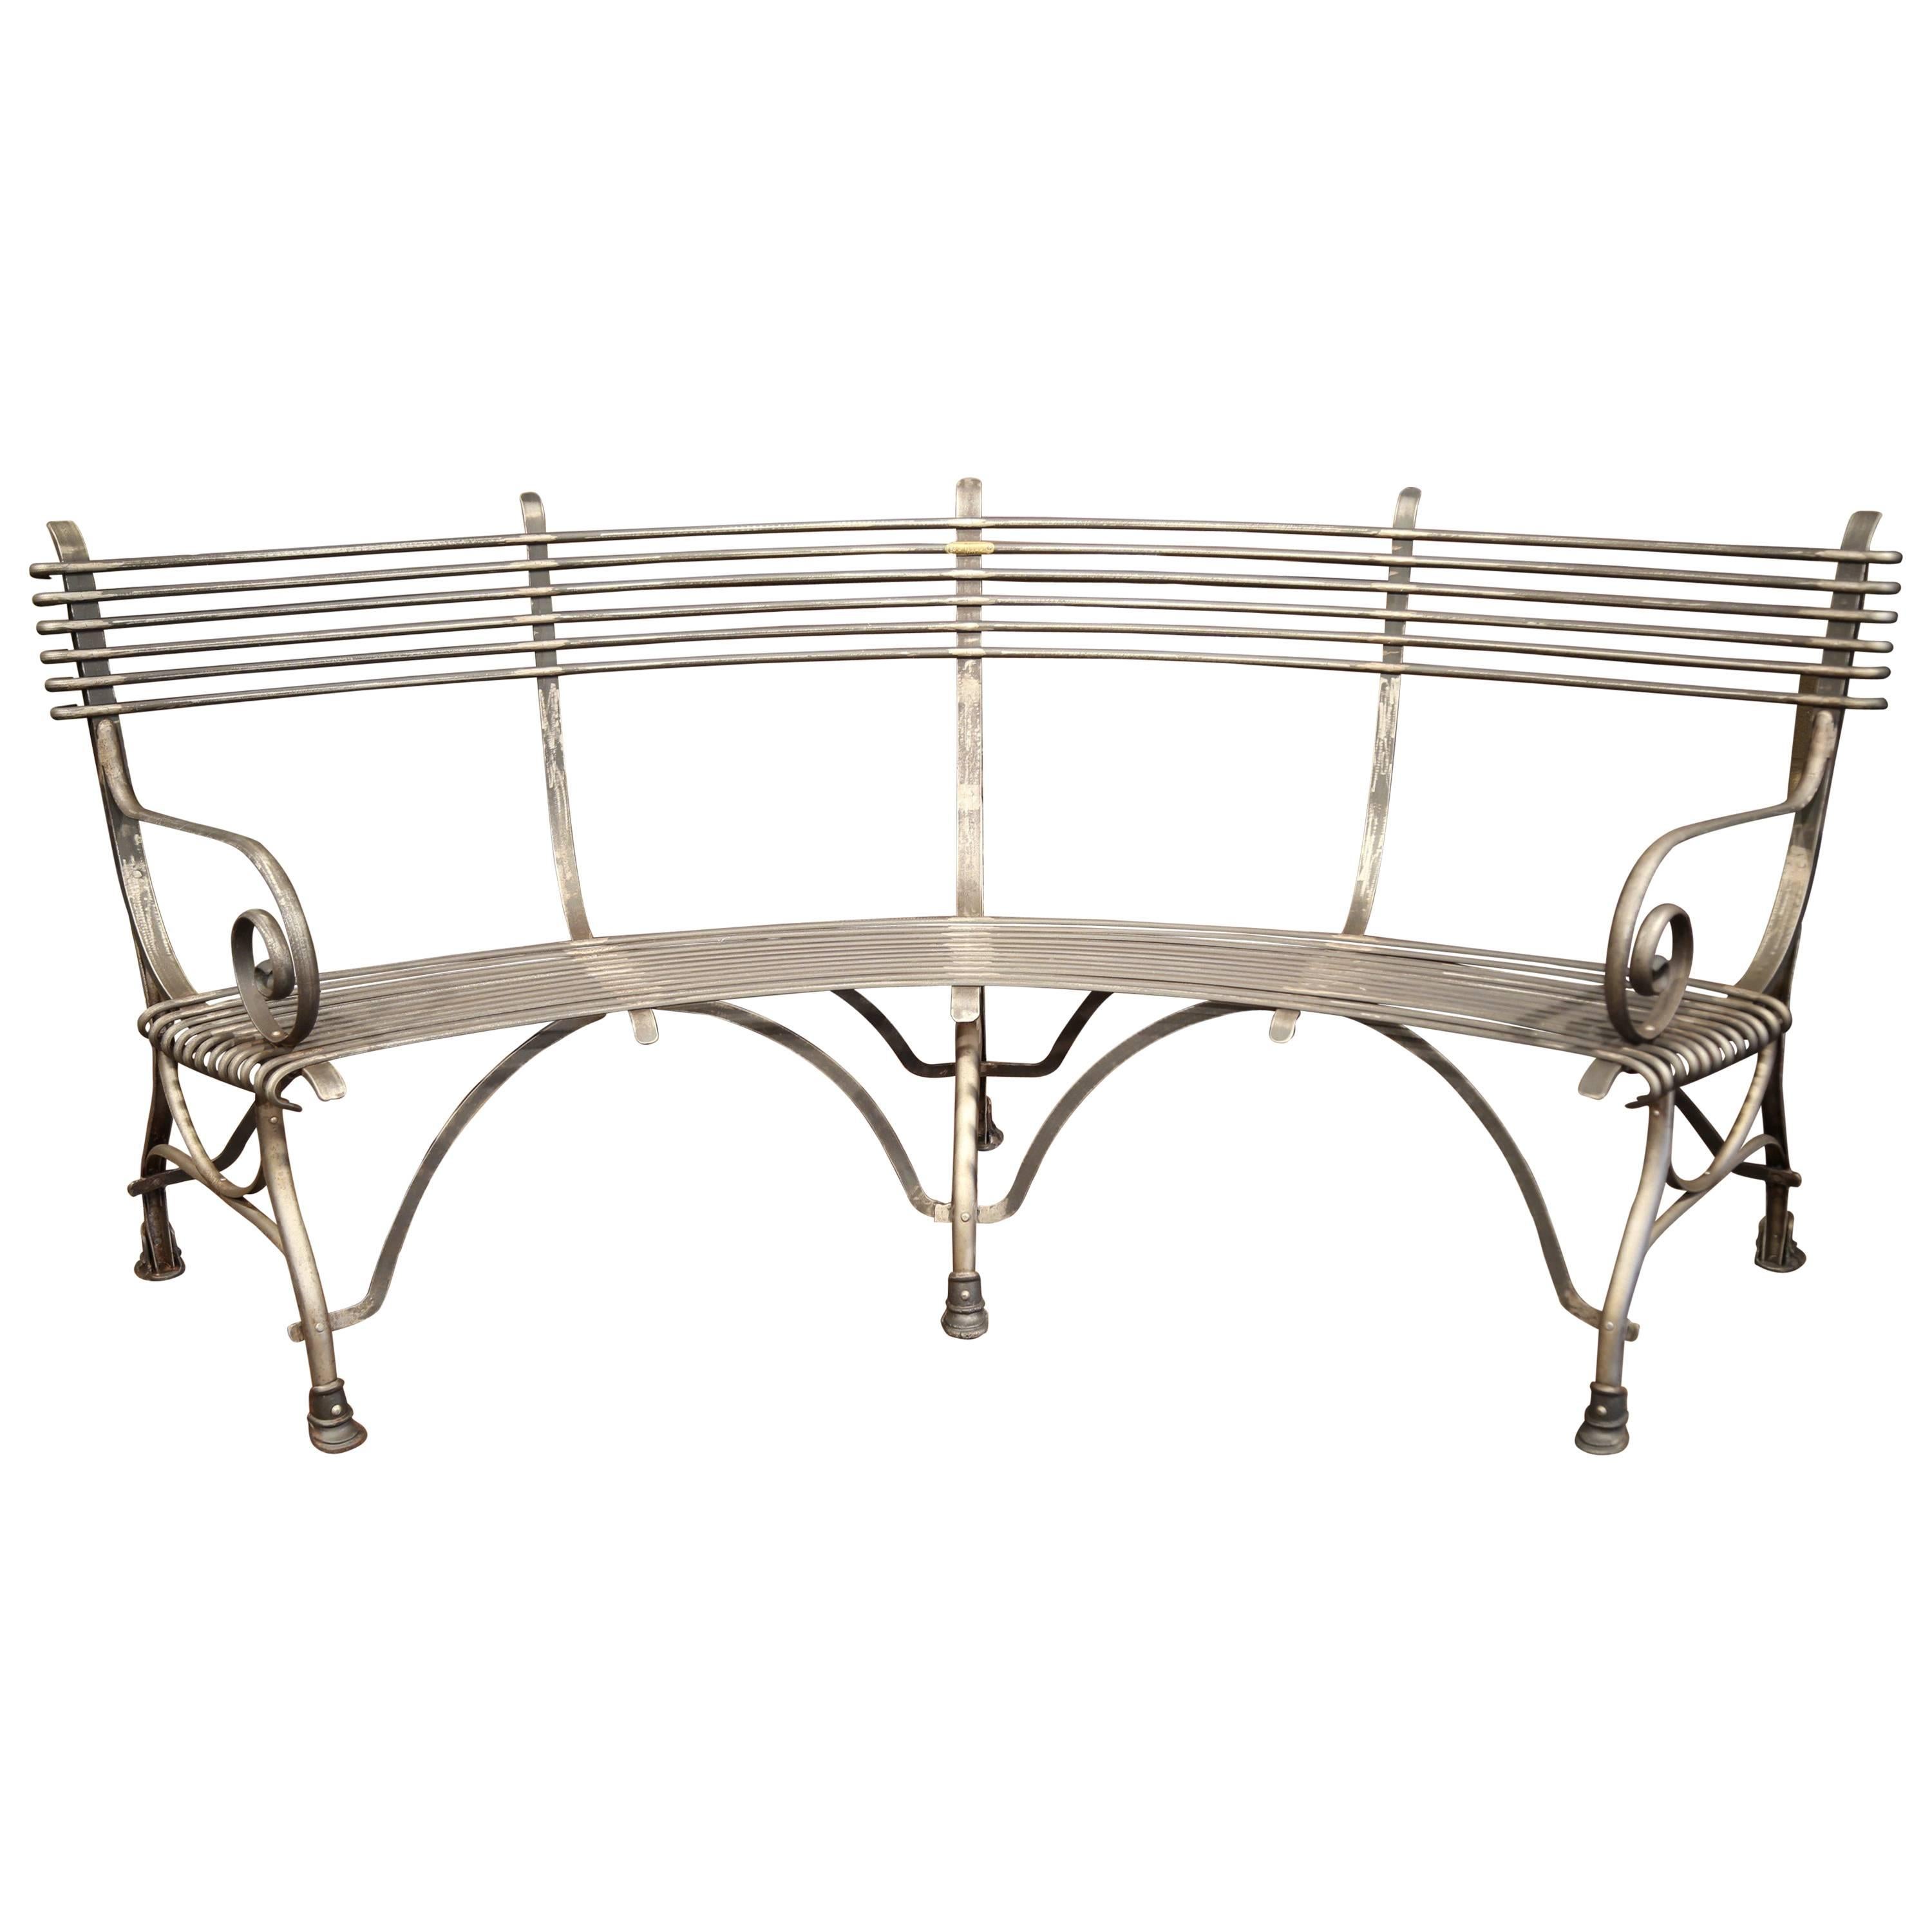 French Polished Iron Curved Bench with Hoof Feet Signed Sauveur Arras